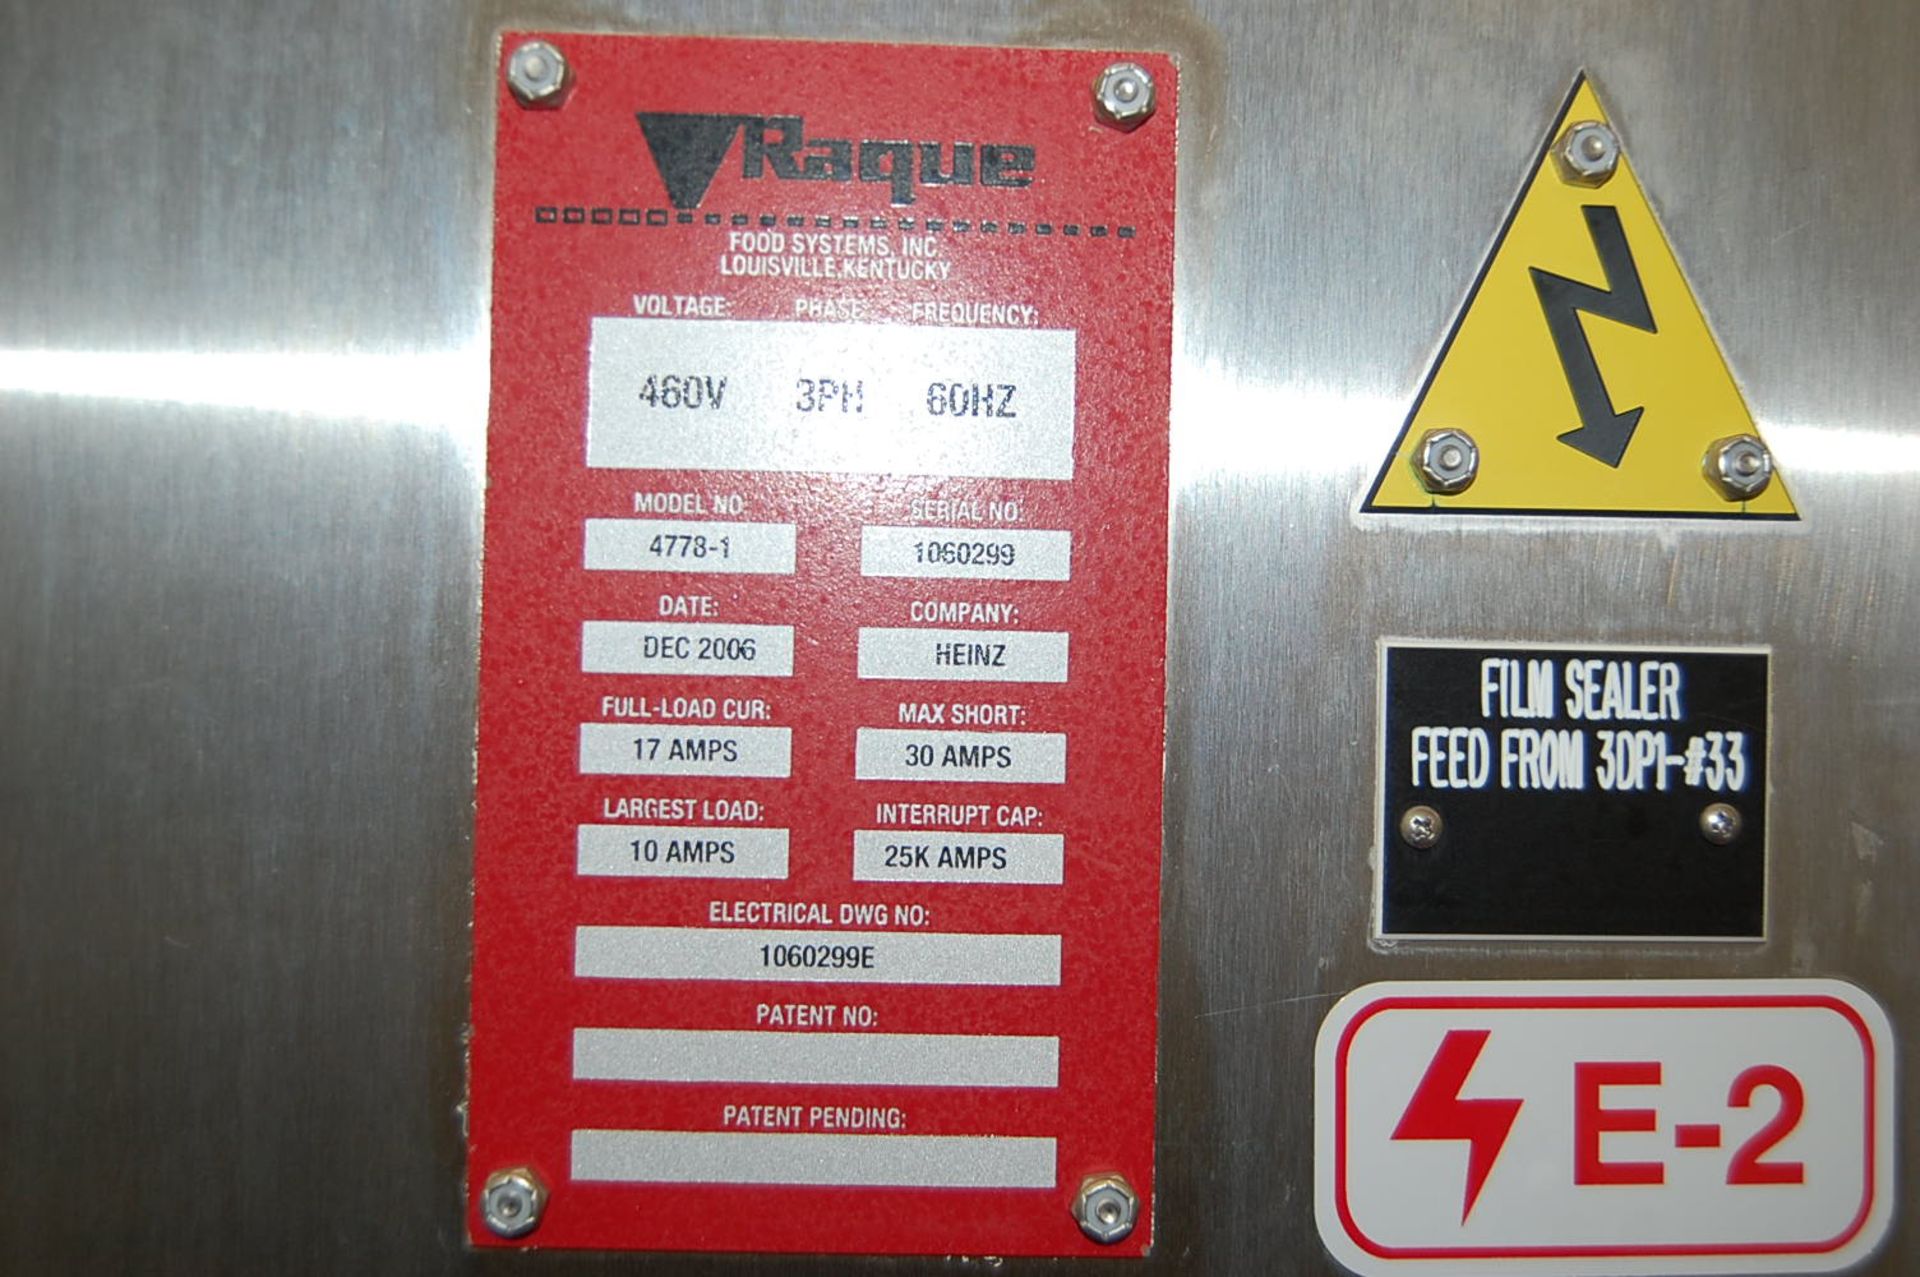 2006 Raque Model #4778-1 Two Lane Tray Sealer, Wired, 460 Volt, Motor & Controls, SN 1060299. - Image 2 of 4